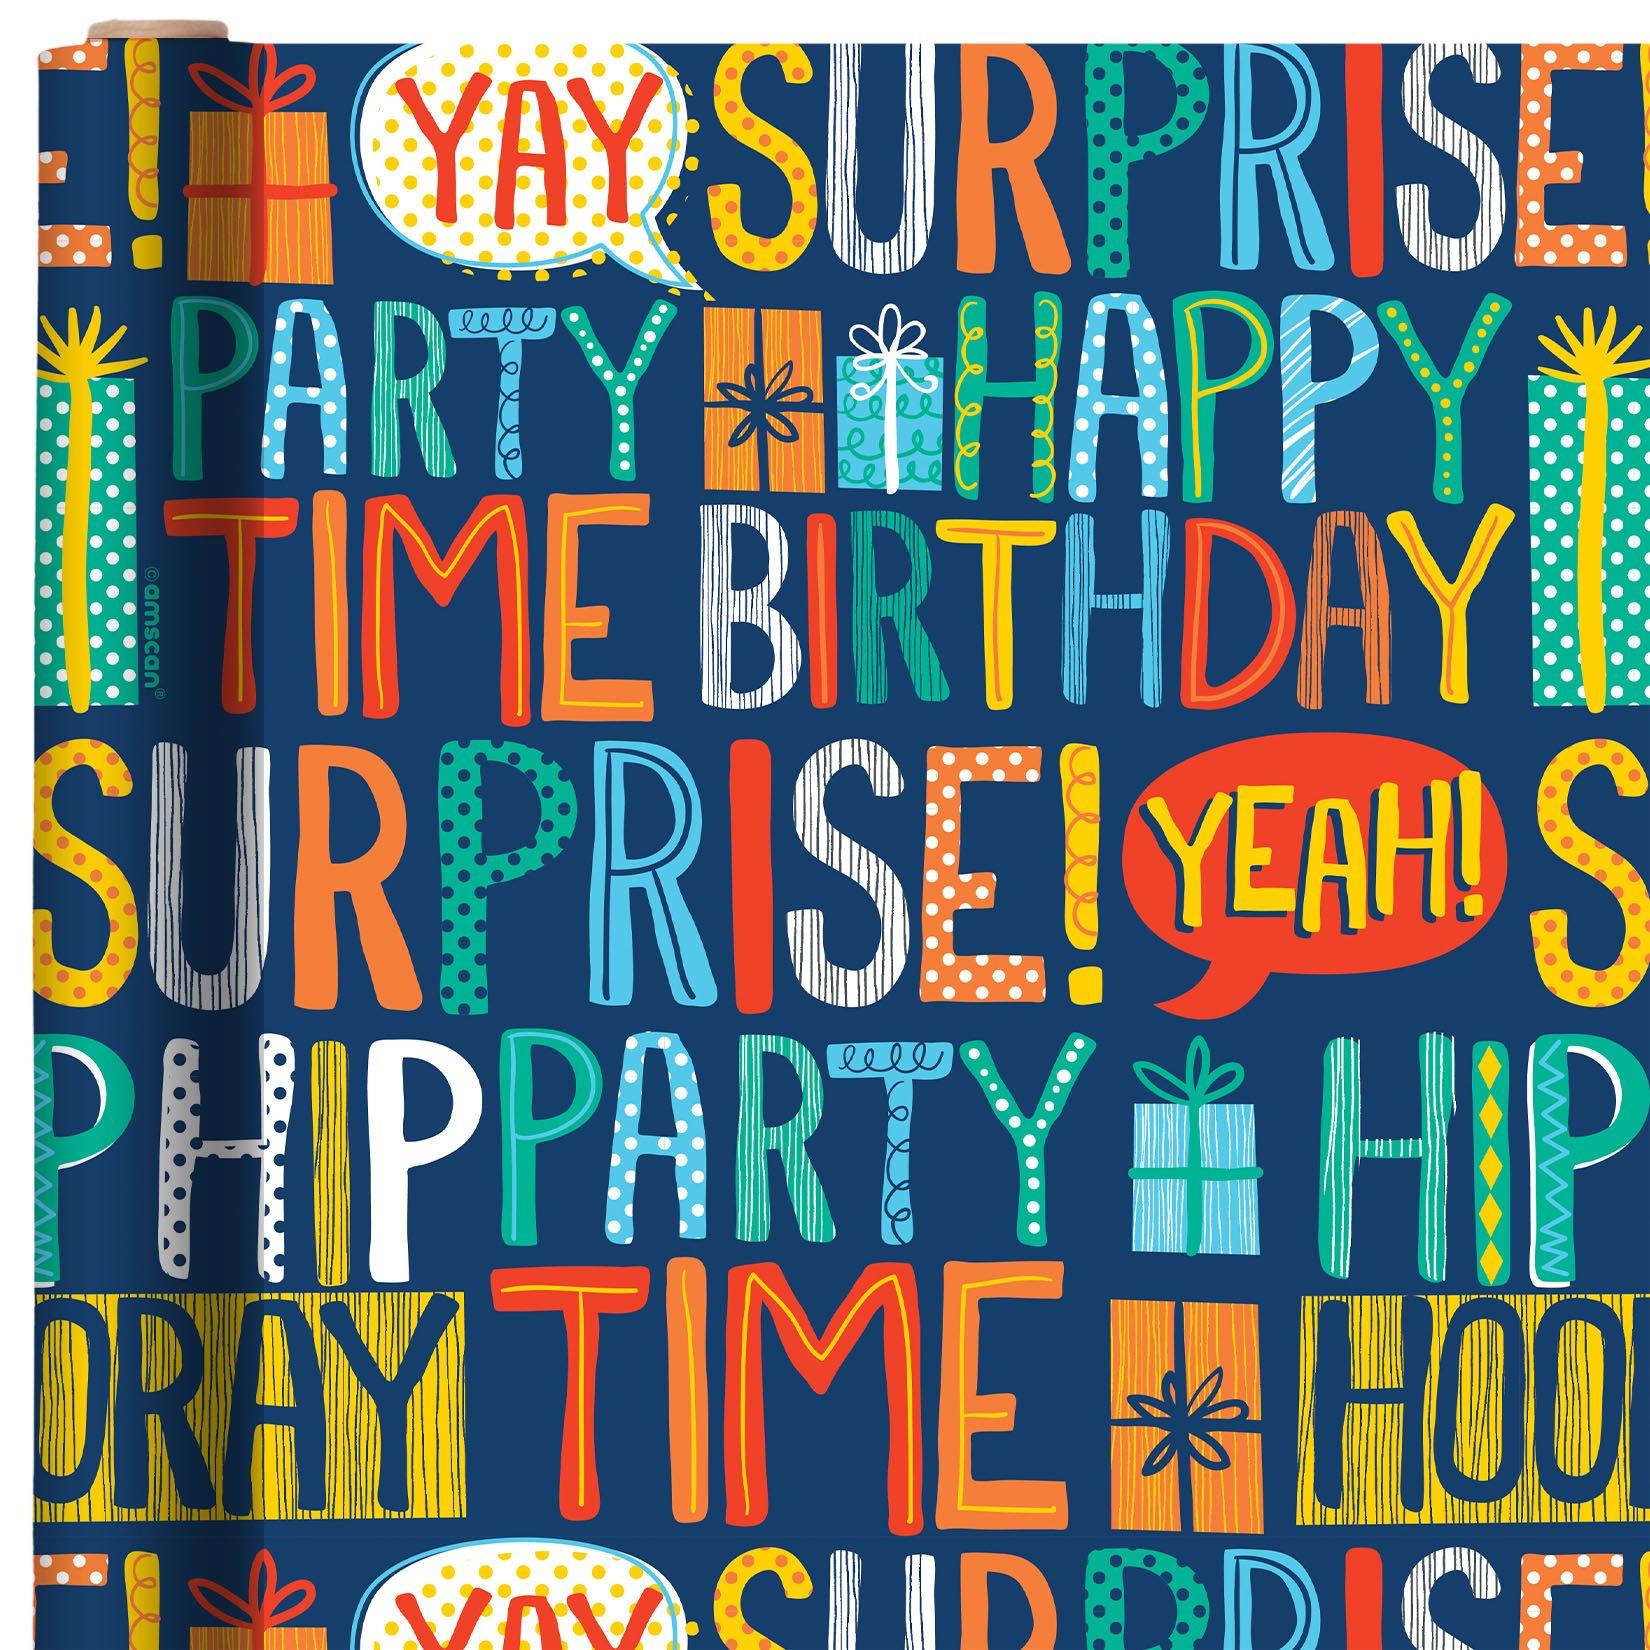 Party Zone Construction Sign Birthday Boy Premium Gift Wrap Wrapping Paper  Roll 